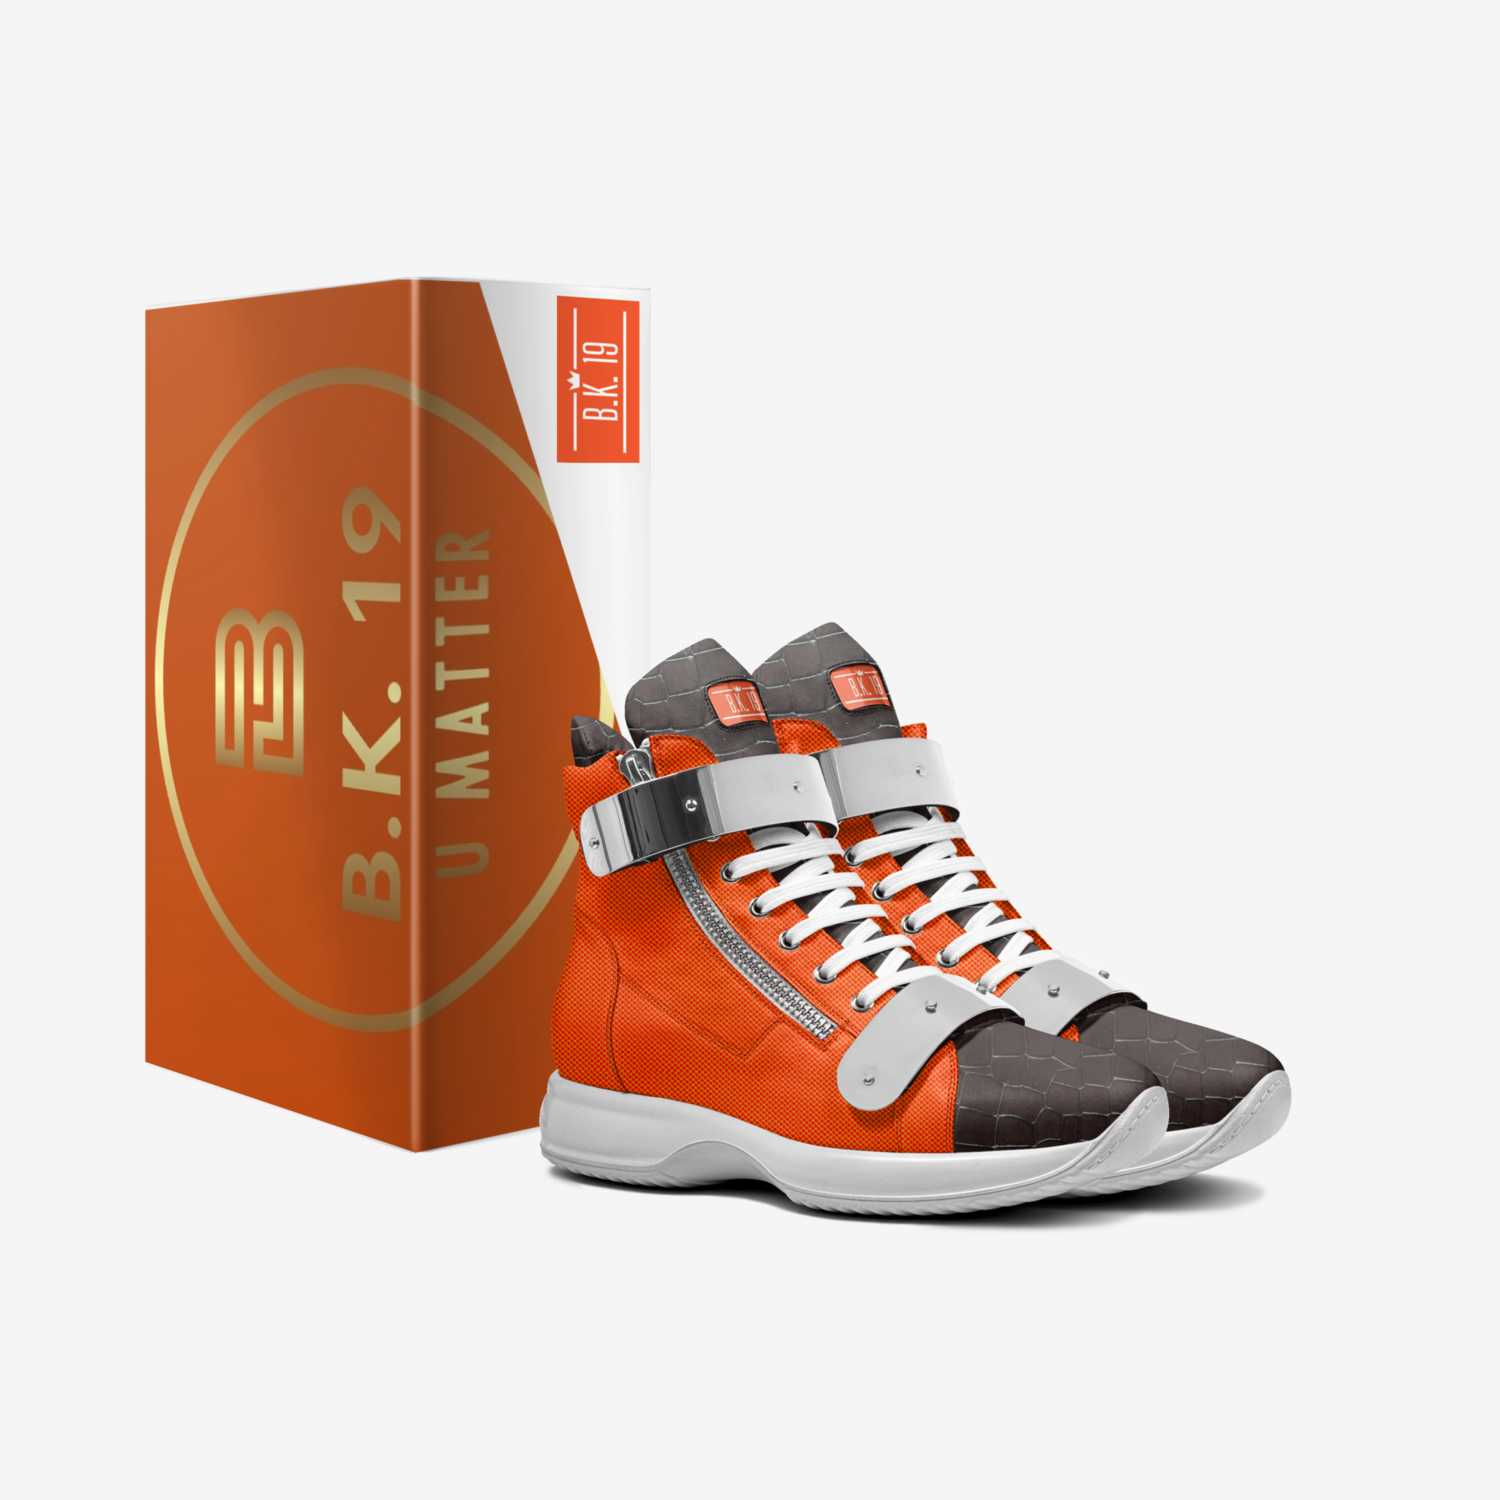 B.K. 19 custom made in Italy shoes by Jay Rock | Box view